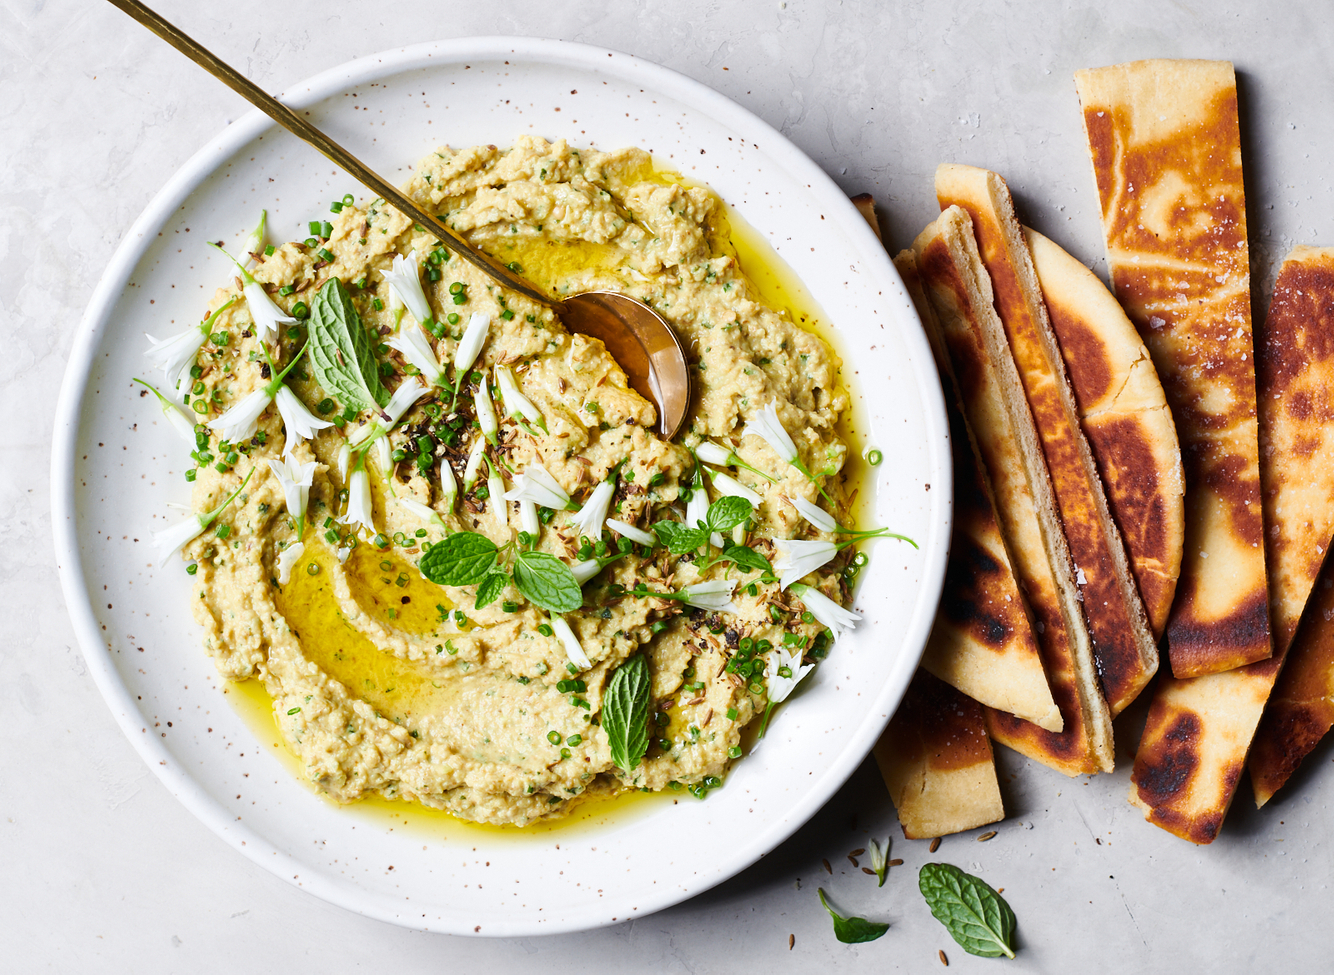 Spring hummus and oil with mint dip and flatbread